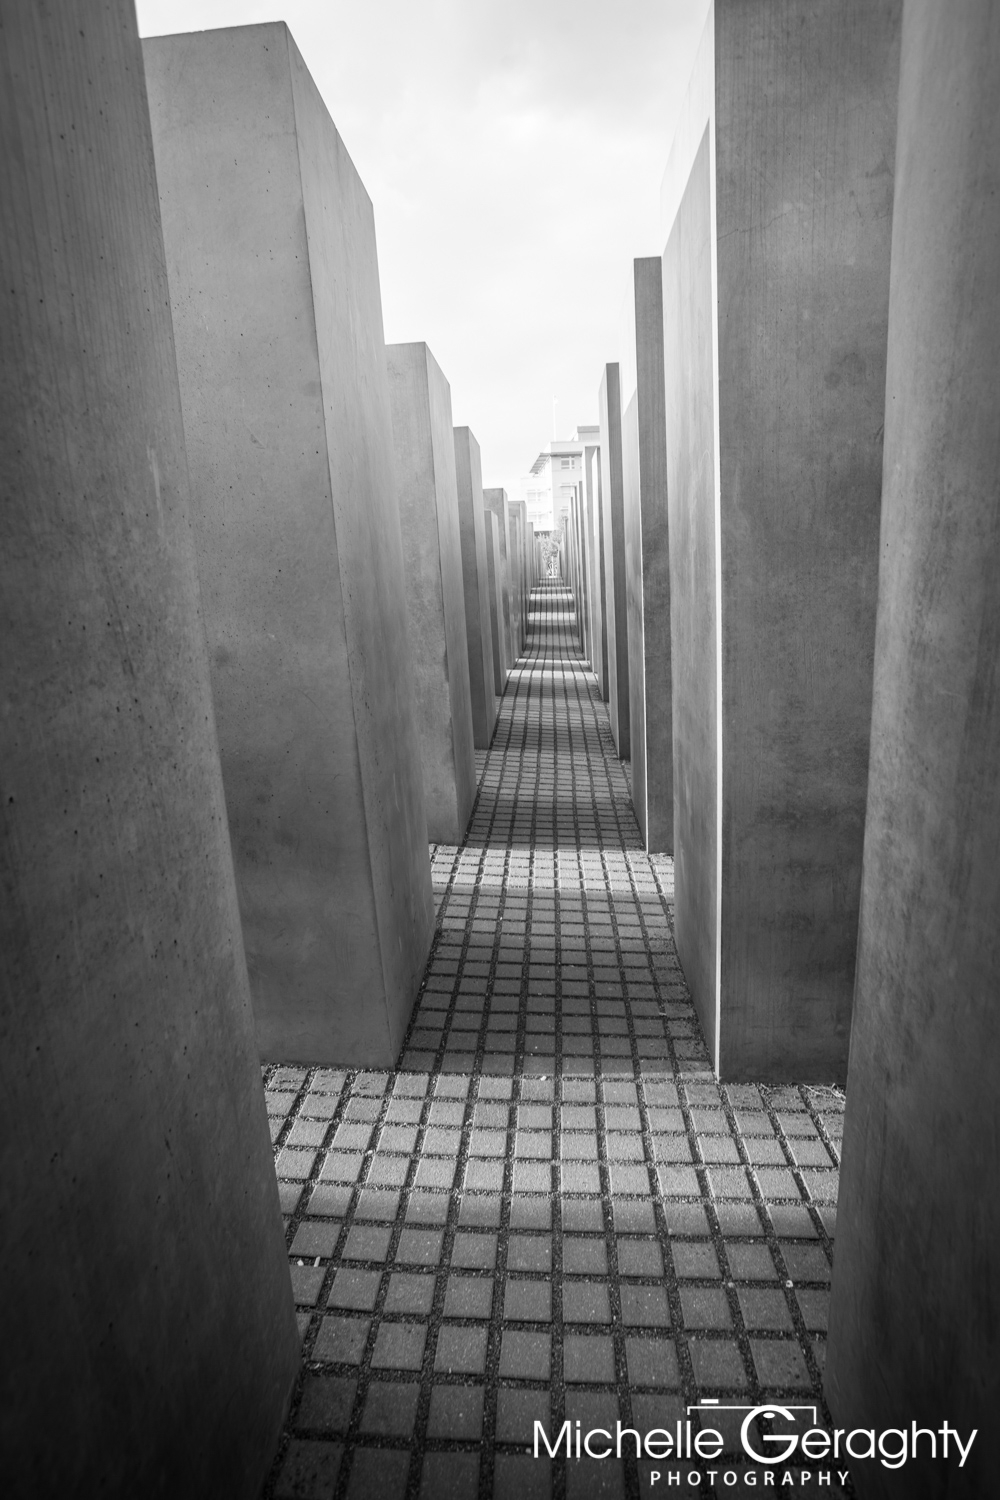 'Memorial to the Murdered Jews of Europe', Berlin, Germany